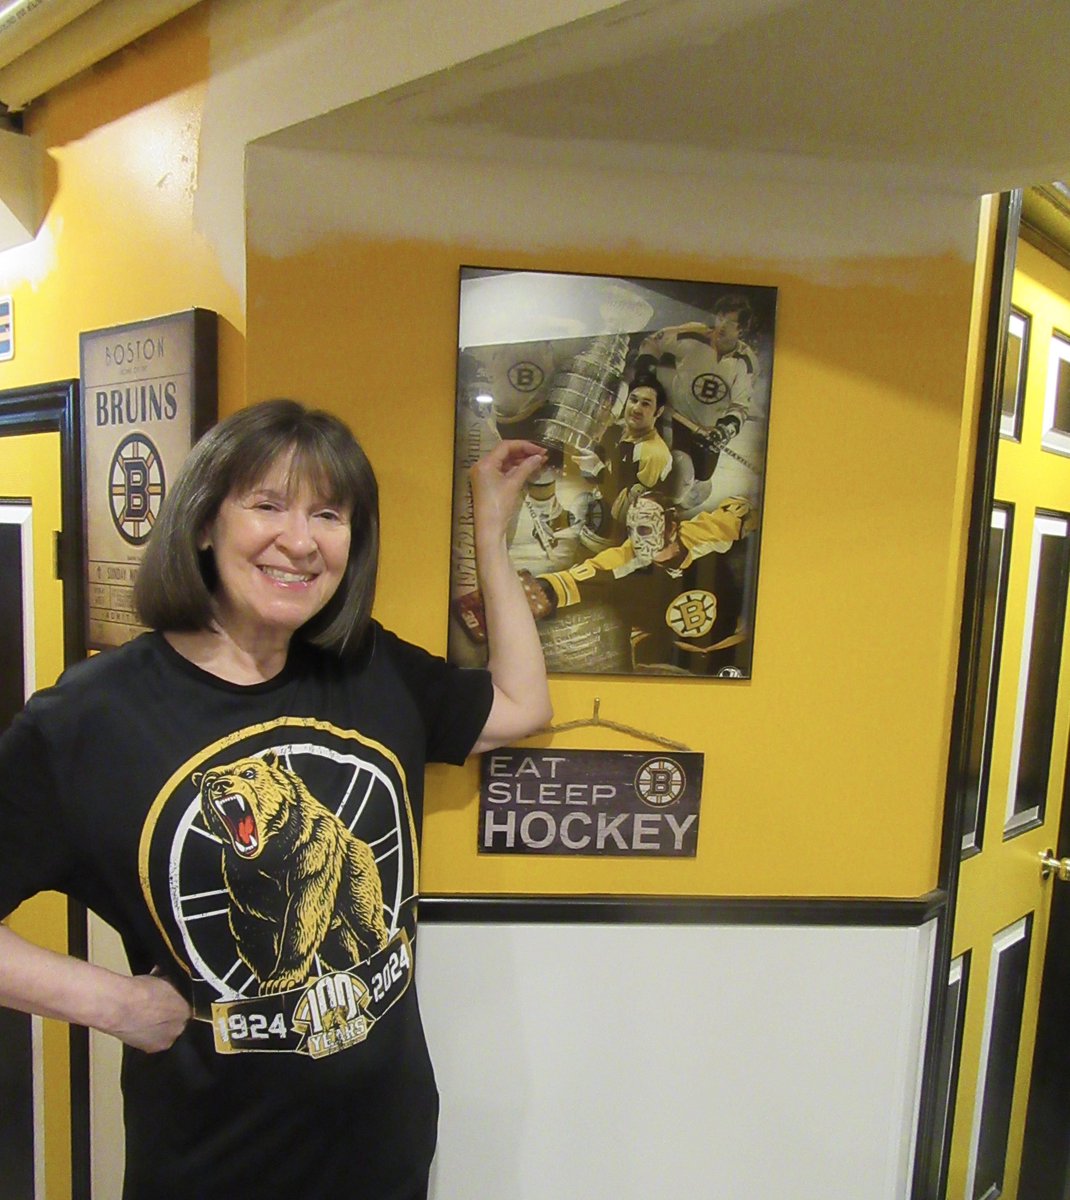 I got my two tees from @BornBruin77 and tried them out in our Bruins Bar. Helping the Chief hold up the Cup, poster is also from @BornBruin77 .  Pasta with Pasta! I love them both, perfect fit and great quality. Thanks! GoBruins! https://t.co/GfmTiN2FBk